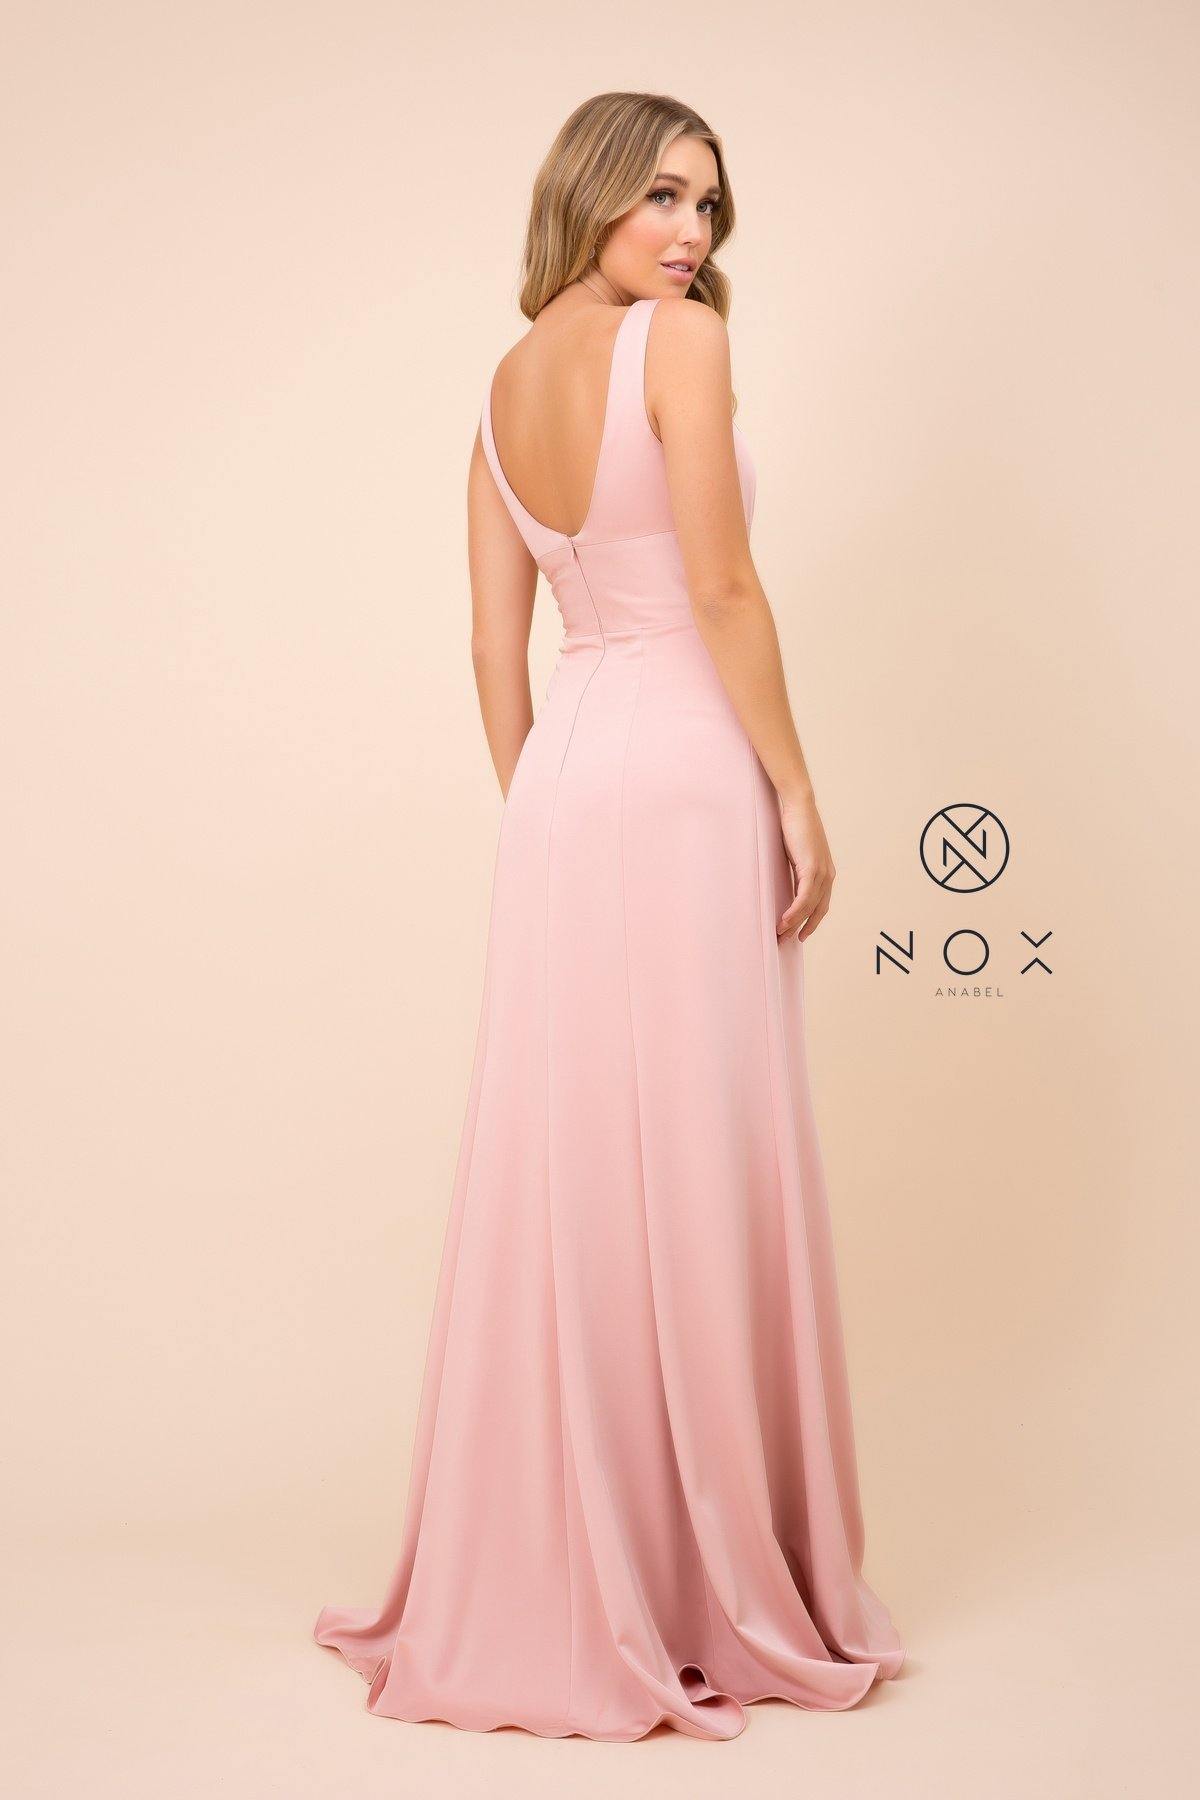 Long Deep V Prom Dress Evening Gown - The Dress Outlet Nox Anabel